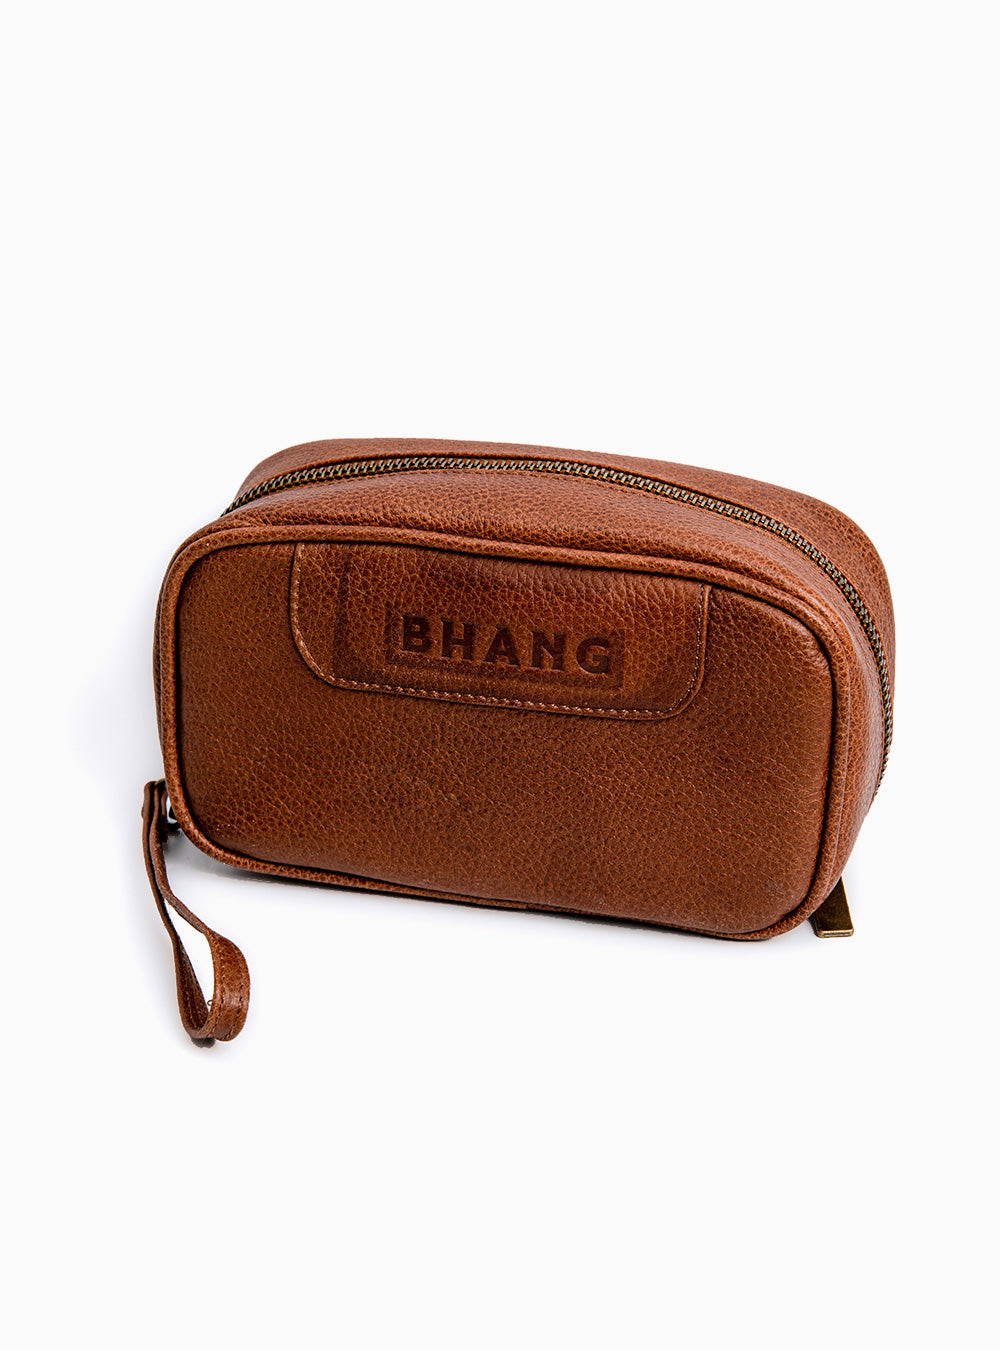 Bhang-Pouch-1.jpg